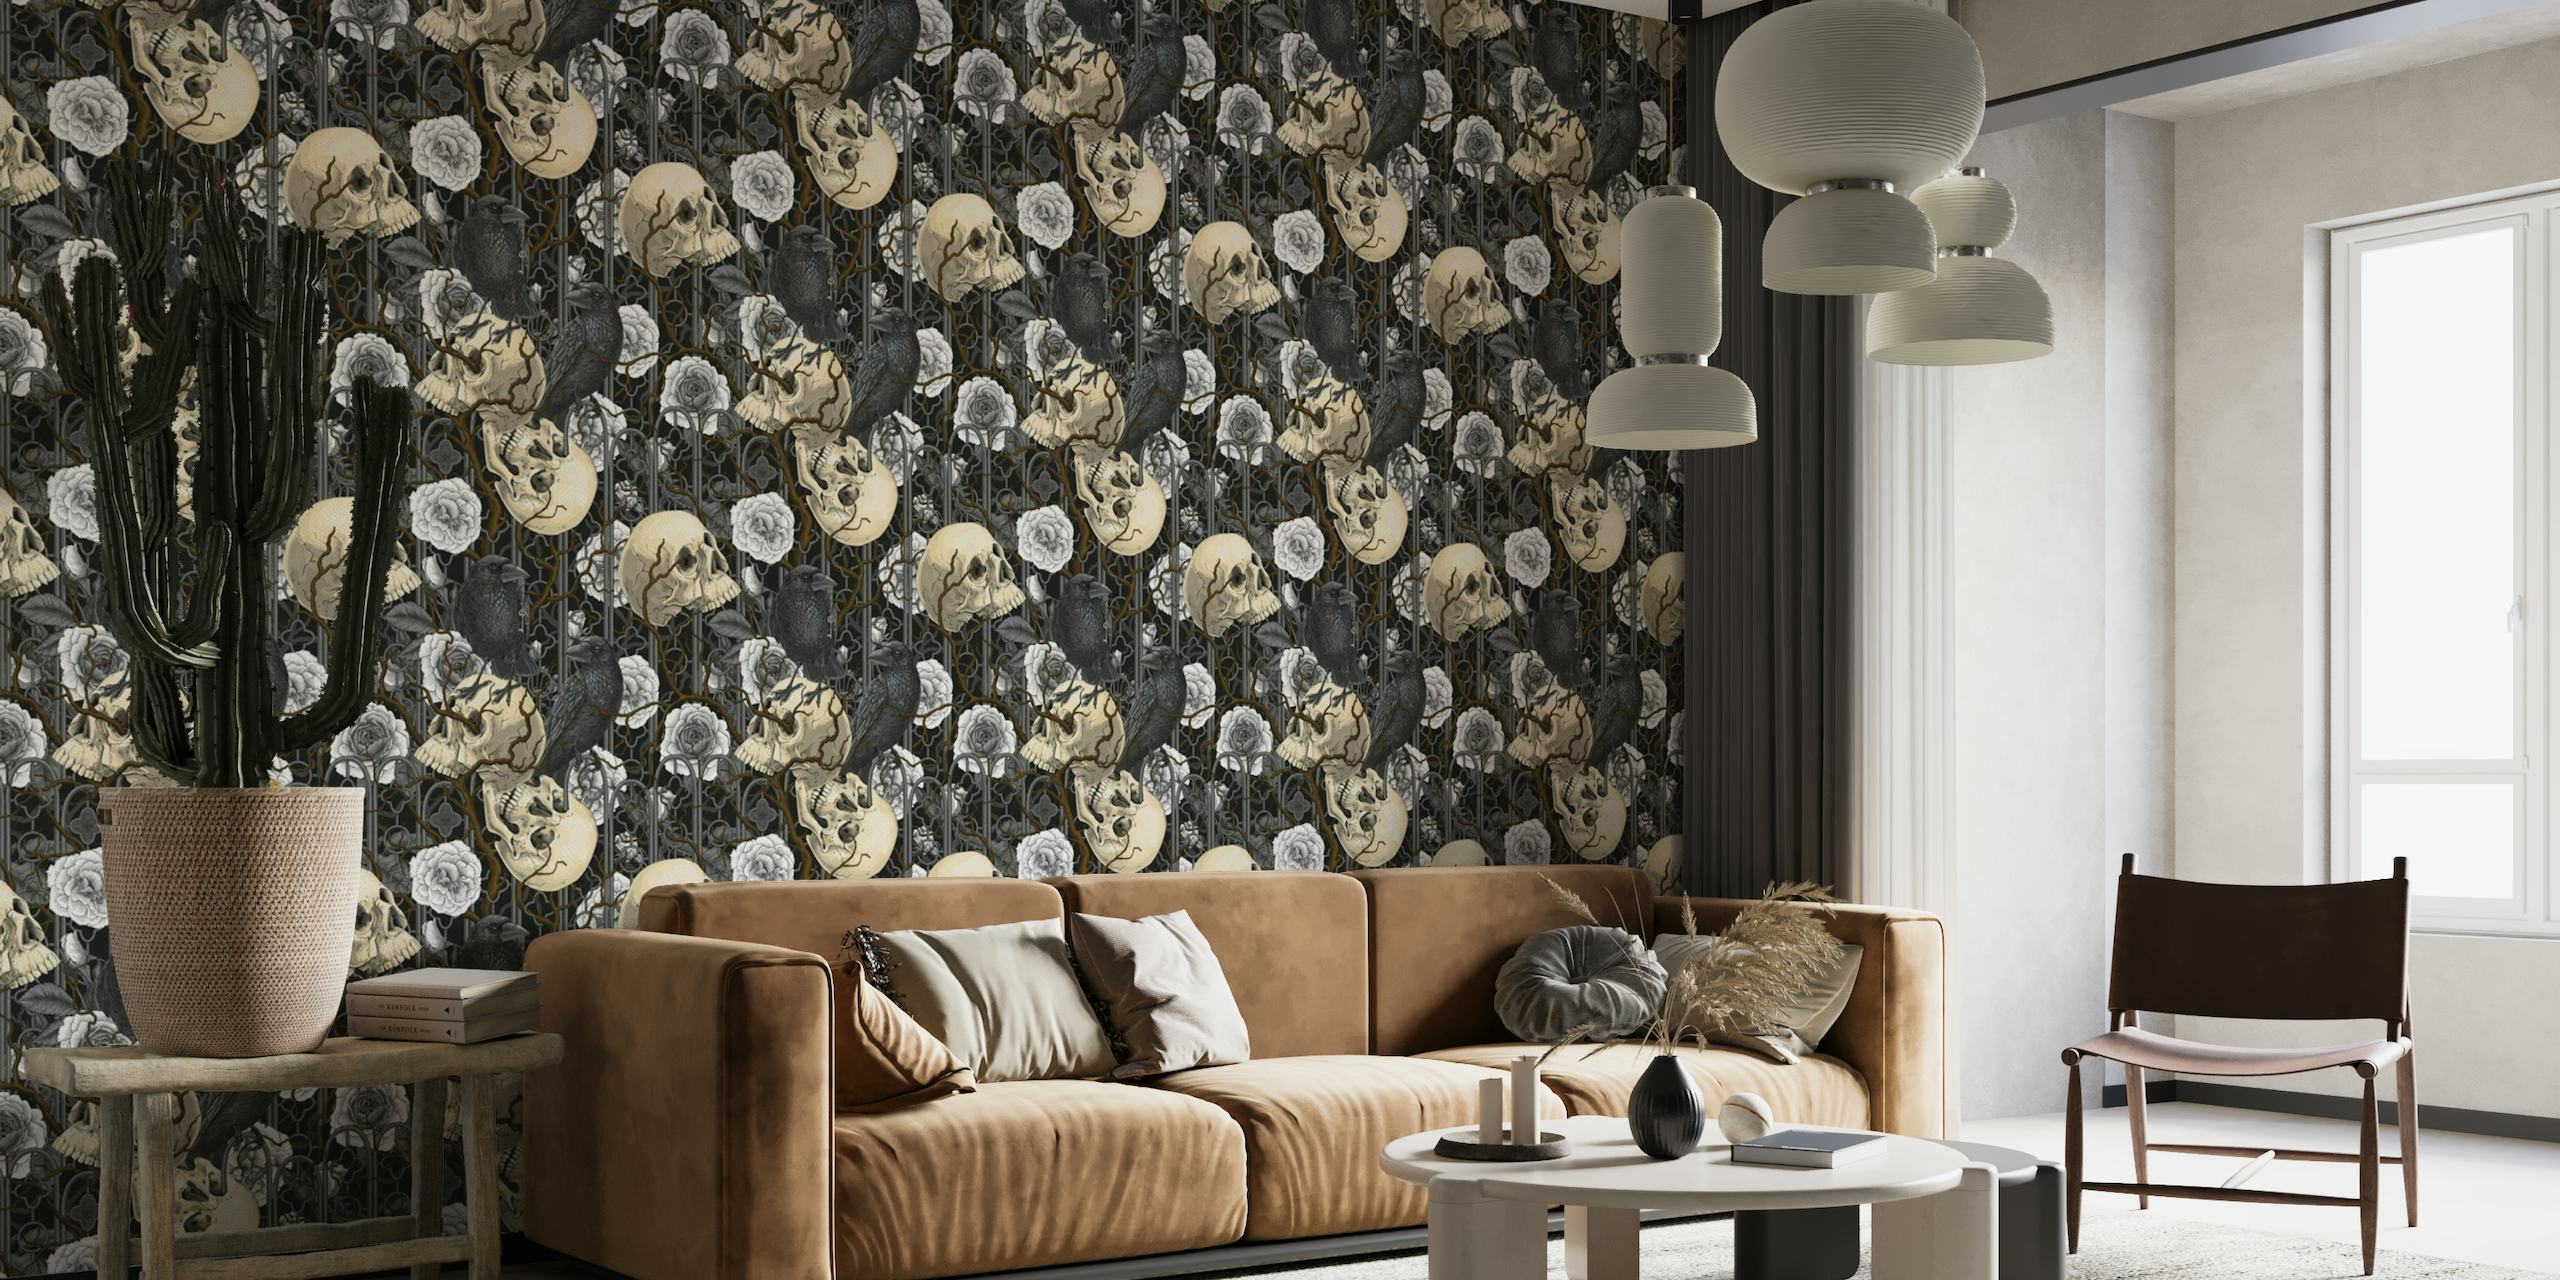 Gothic wall mural with raven, skulls, and white roses on a black background